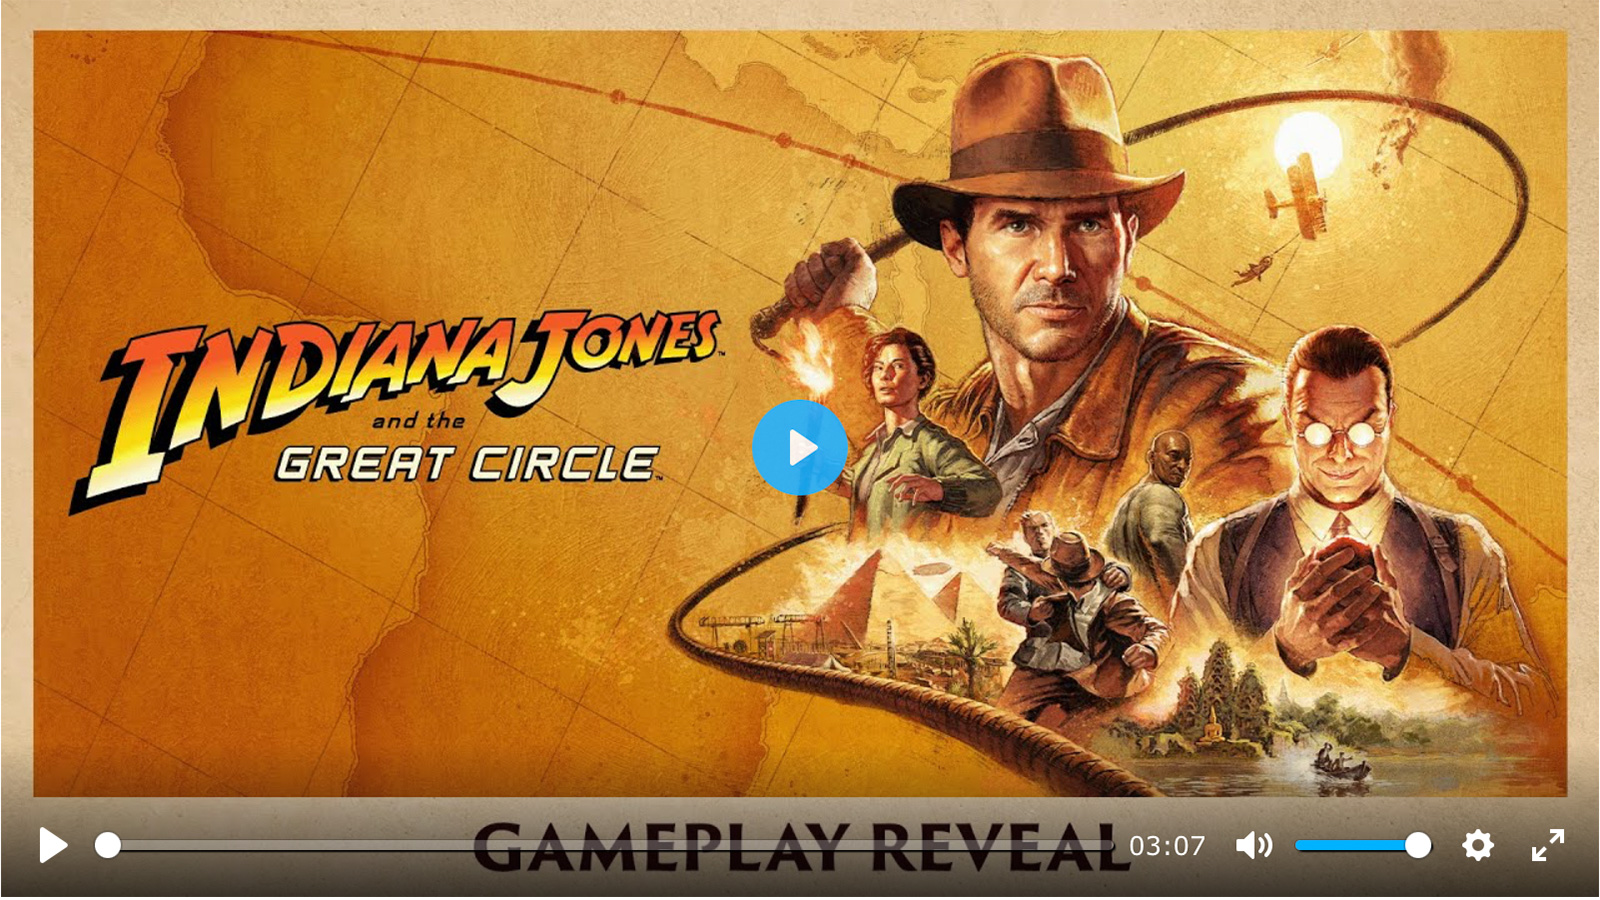 New Gameplay Reveal Trailer - Indiana Jones And The Great Circle